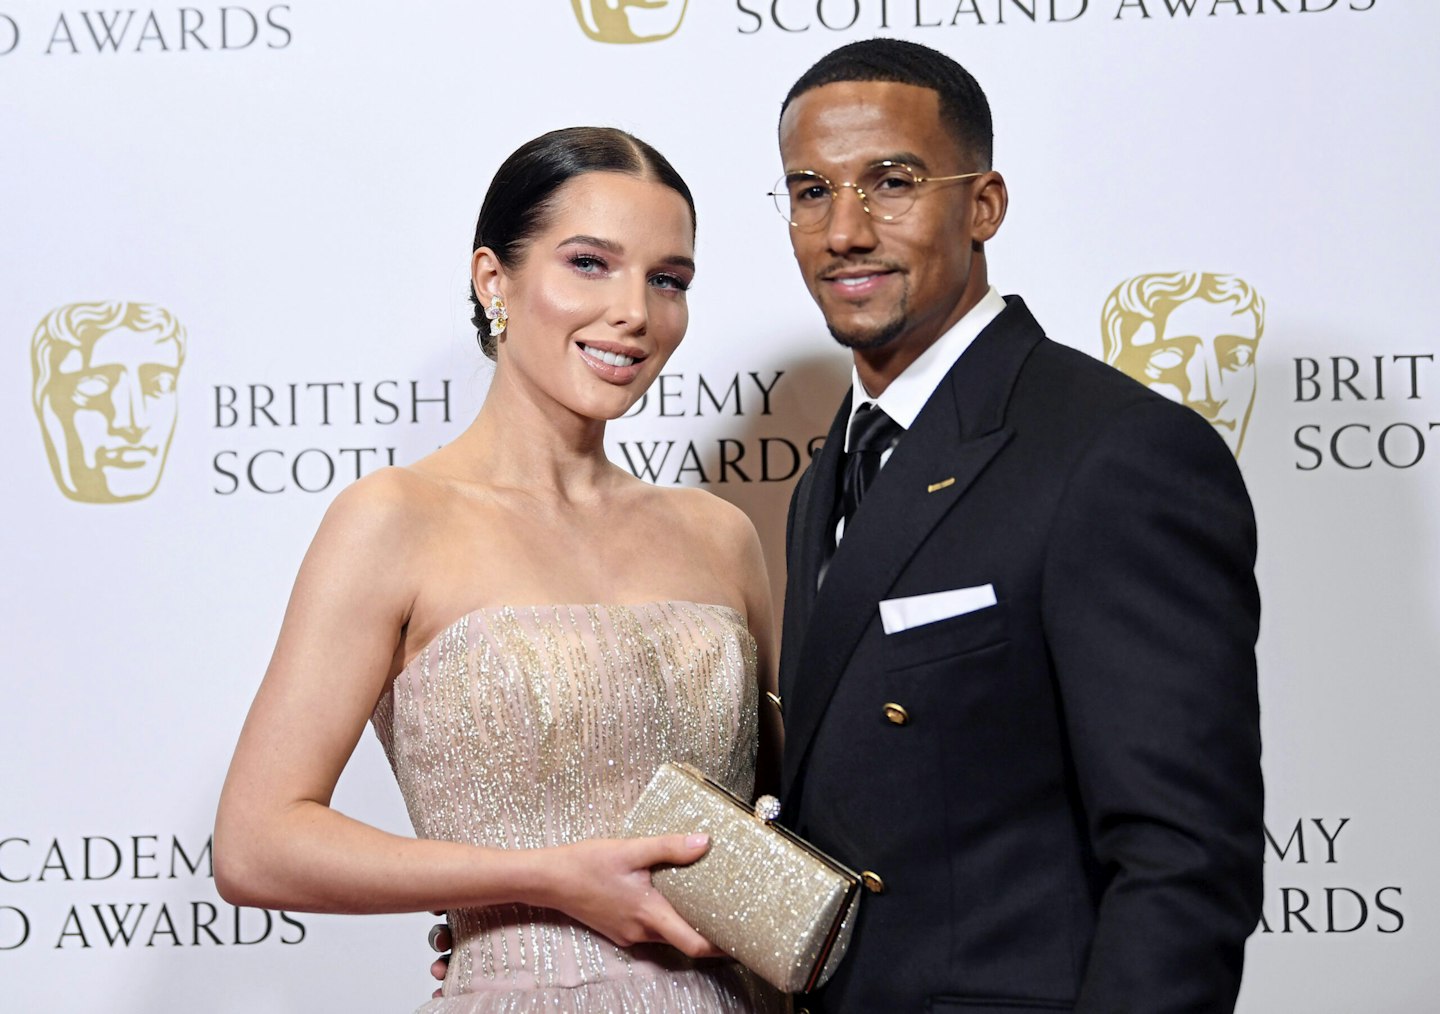 Helen Flanagan and Scott Sinclair pose together